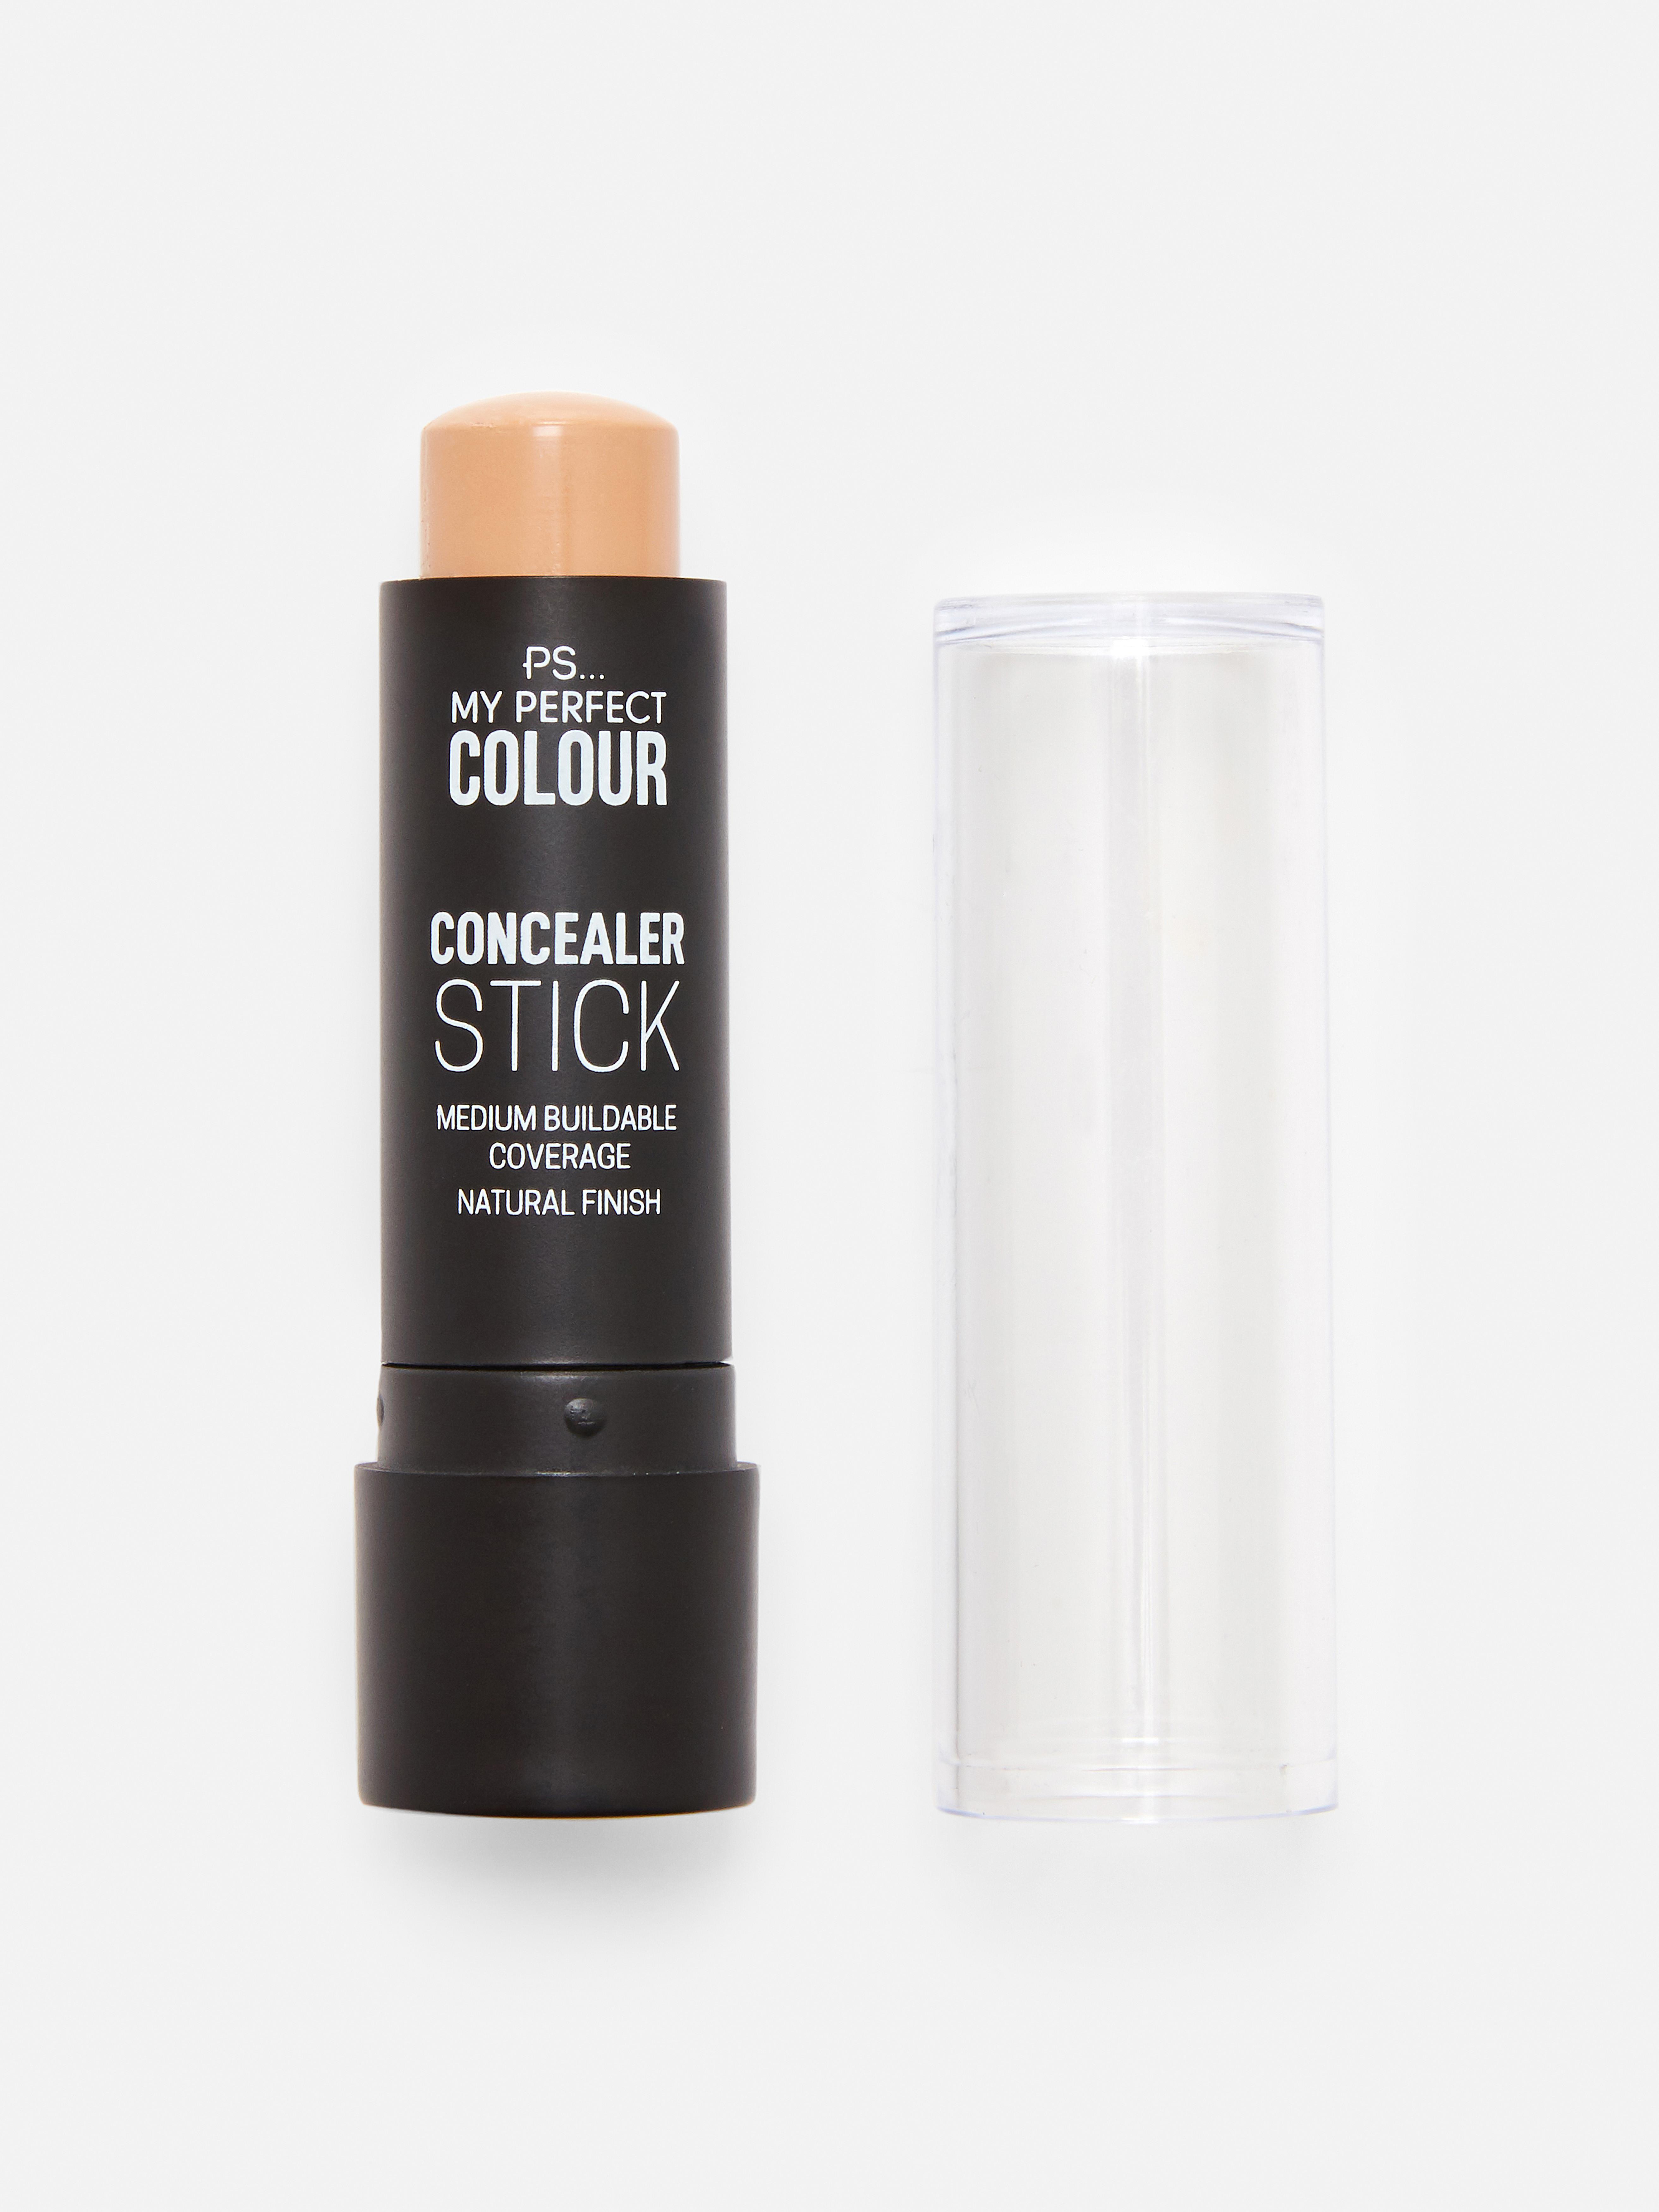 PS... My Perfect Colour Concealer Stick